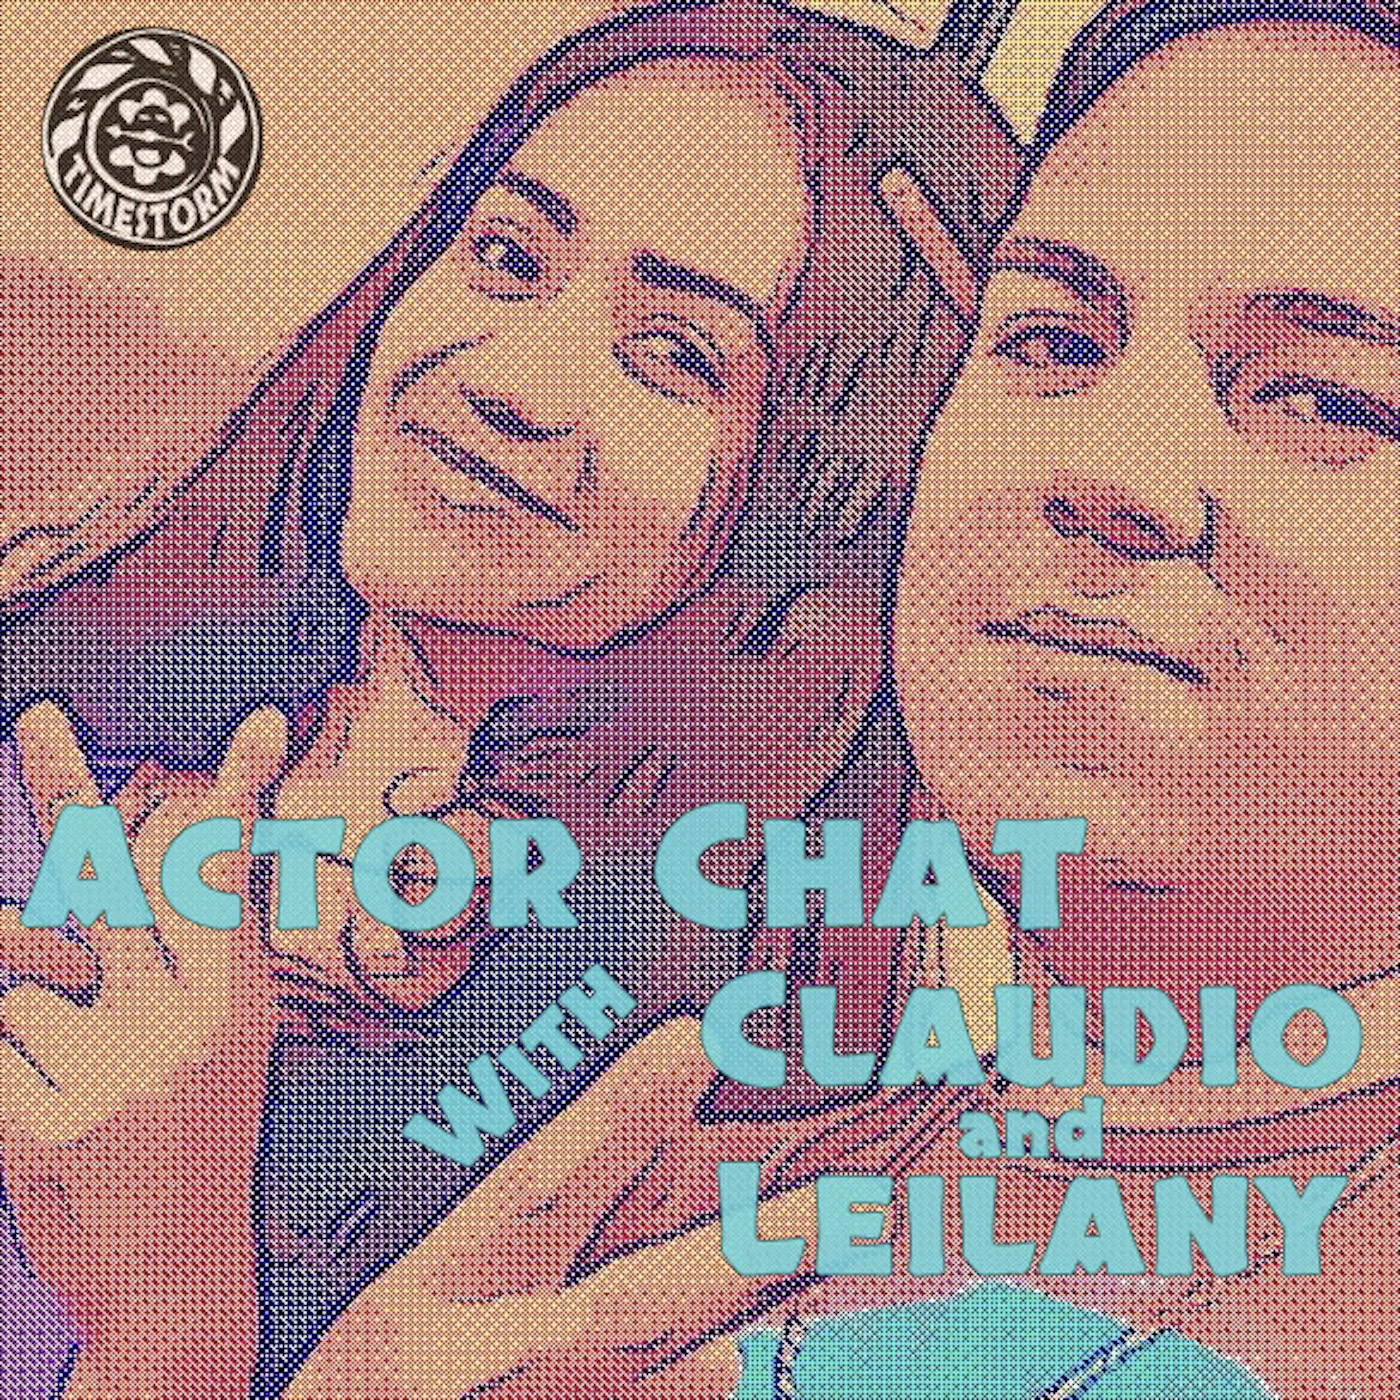 Bonus: Actor Chat with Claudio and Leilany